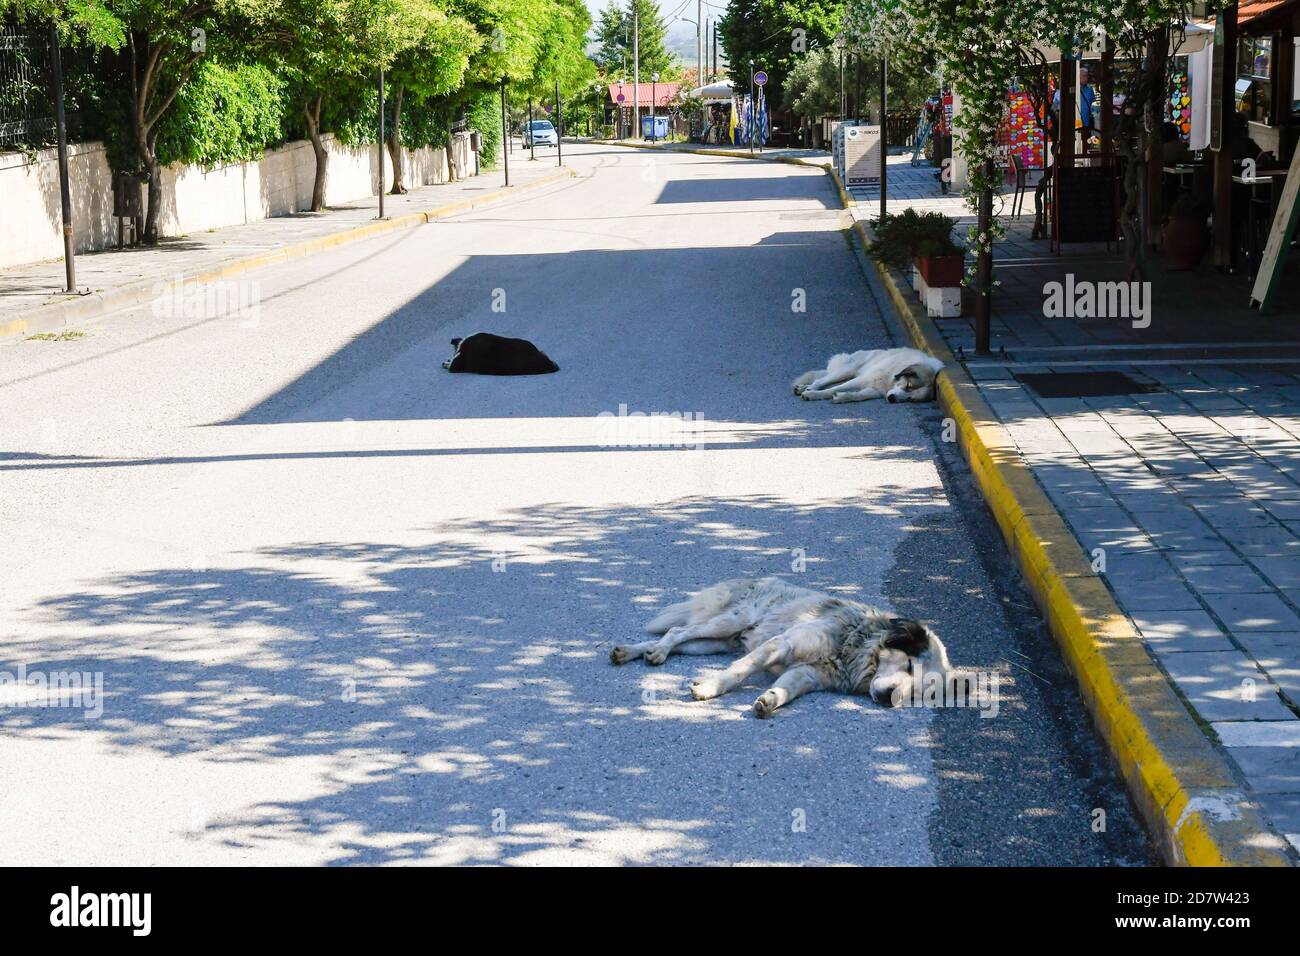 Dogs sleeping unmolested in the street on a  lazy Saturday in Vergina, Greece (location of the tomb of Philip II and other ancient burial sites) Stock Photo